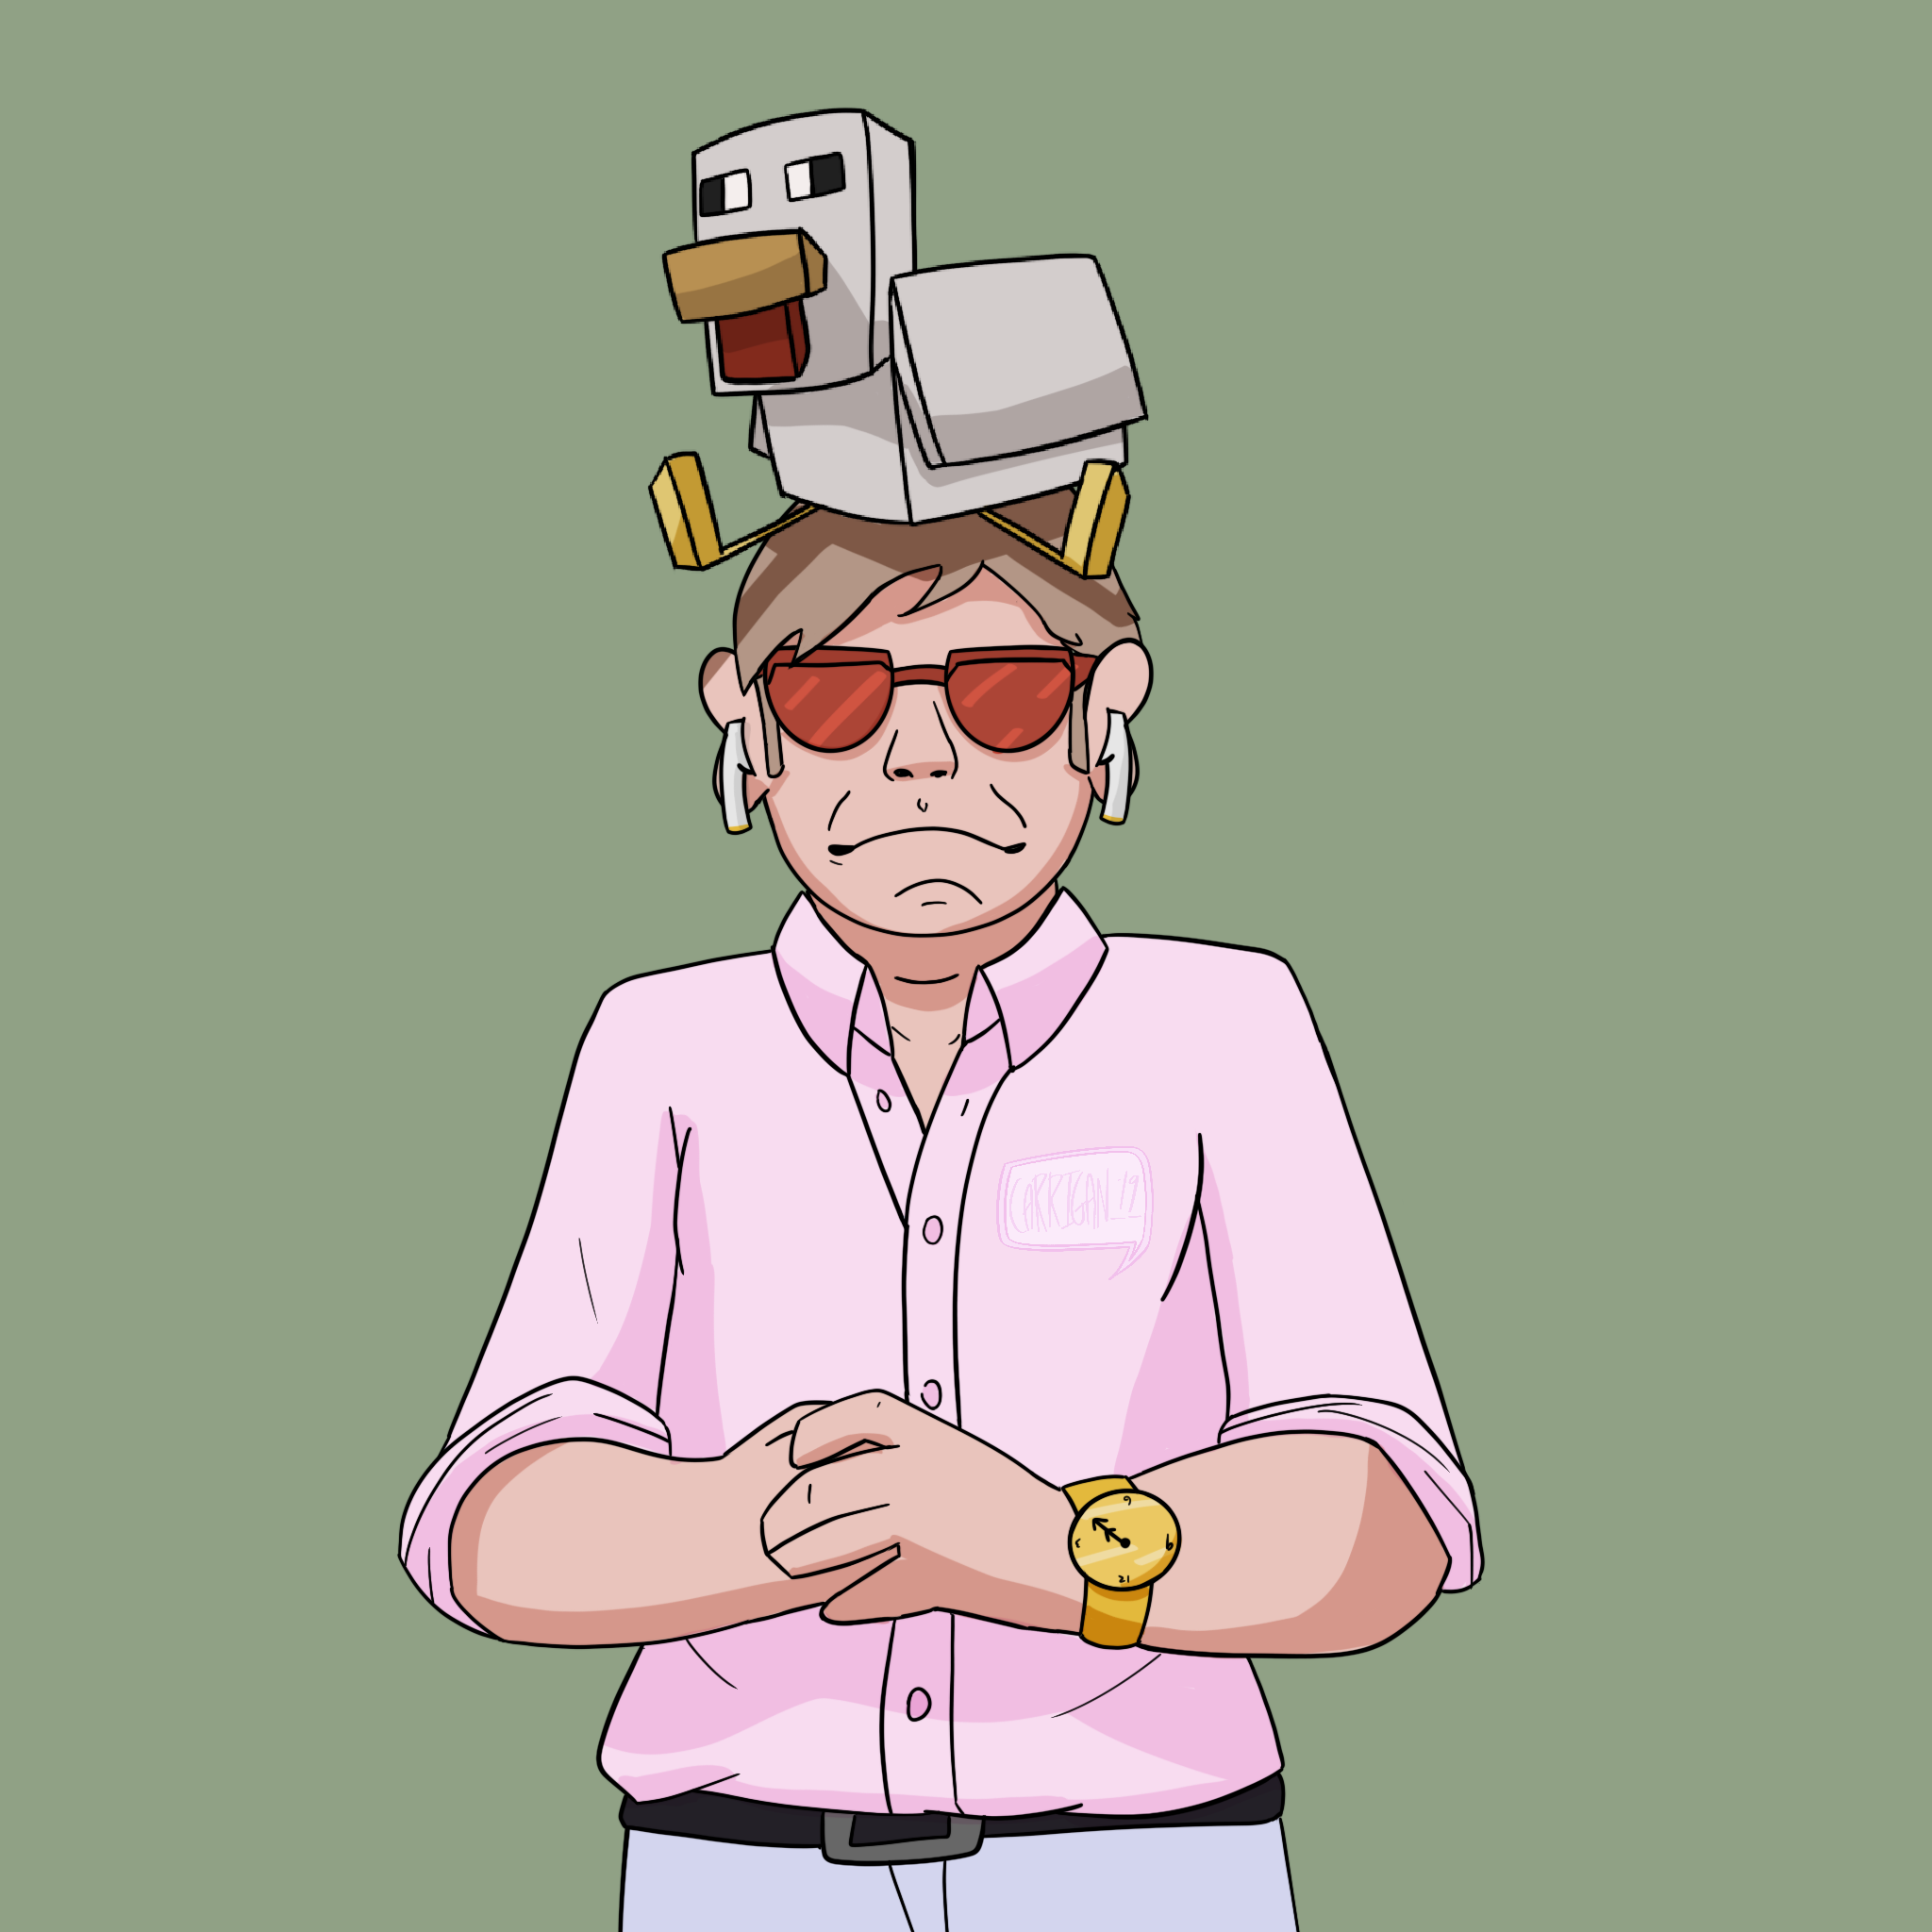 Elton John with a Minecraft Chicken - Commission - 2019